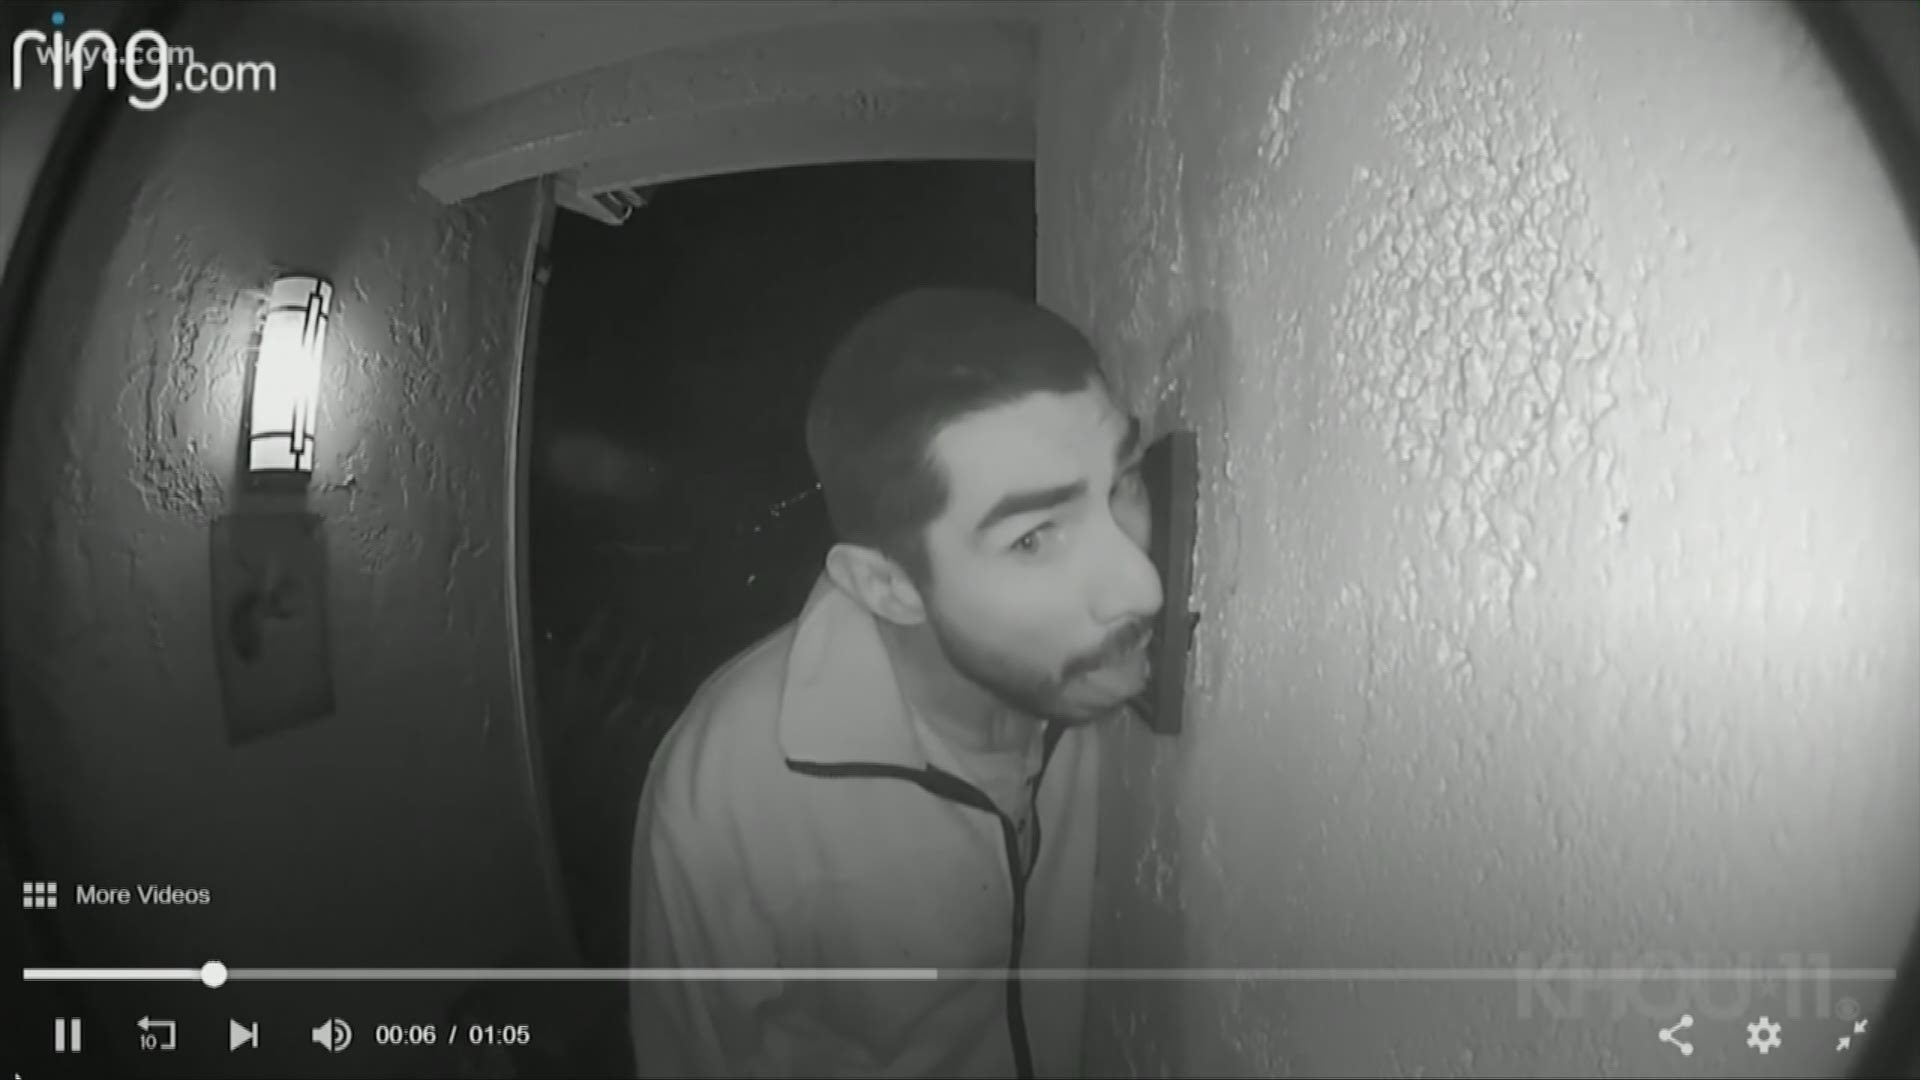 Jan. 9, 2019: This is just one of those stories you can't believe. A camera captured video of a man licking a stranger's doorbell for three hours on a California porch.